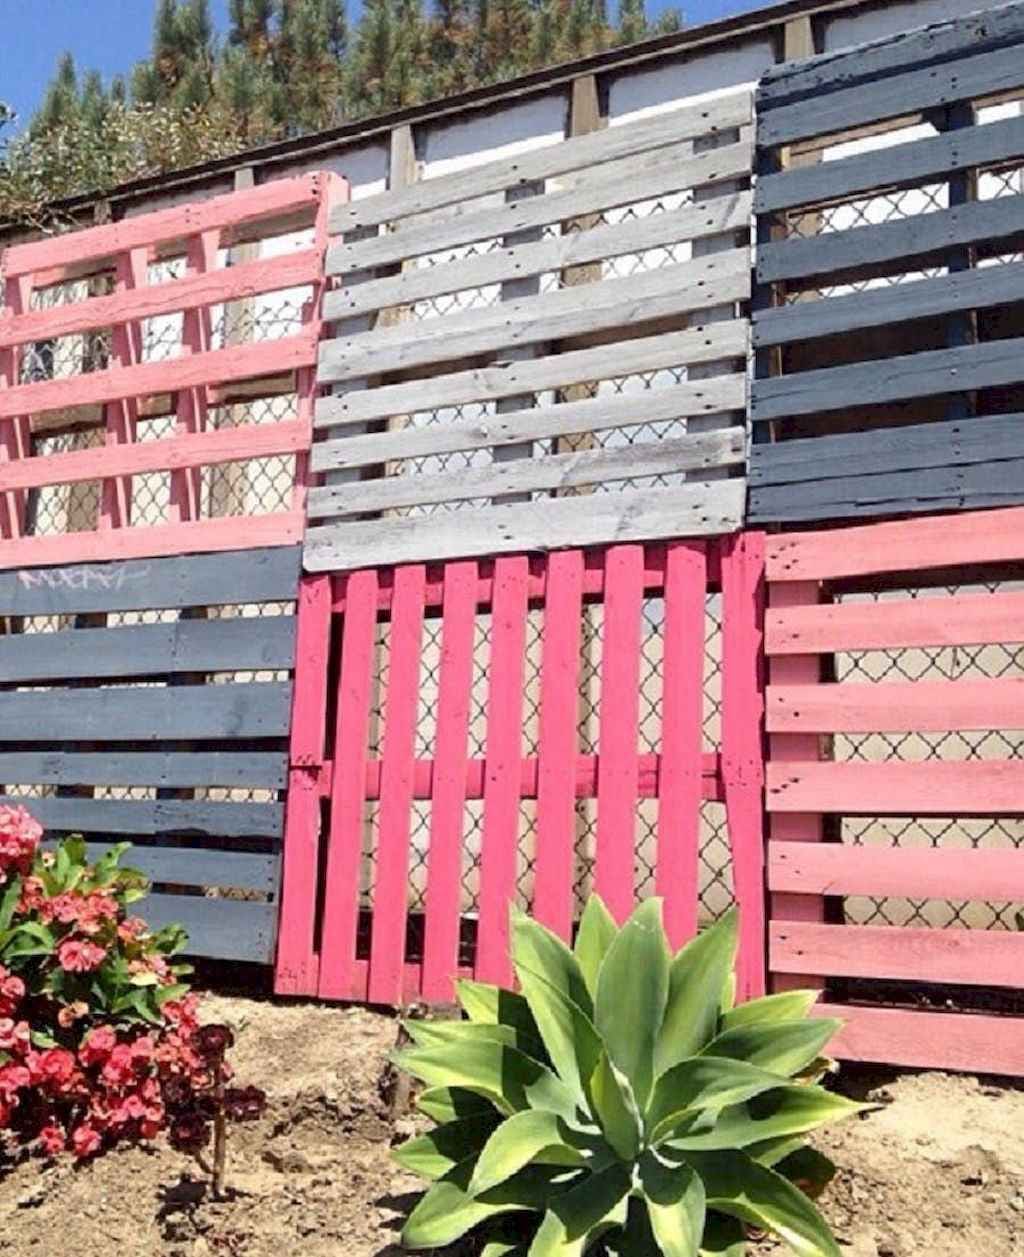 20 ideas for landscaping gardens and backyards with pallets - 165